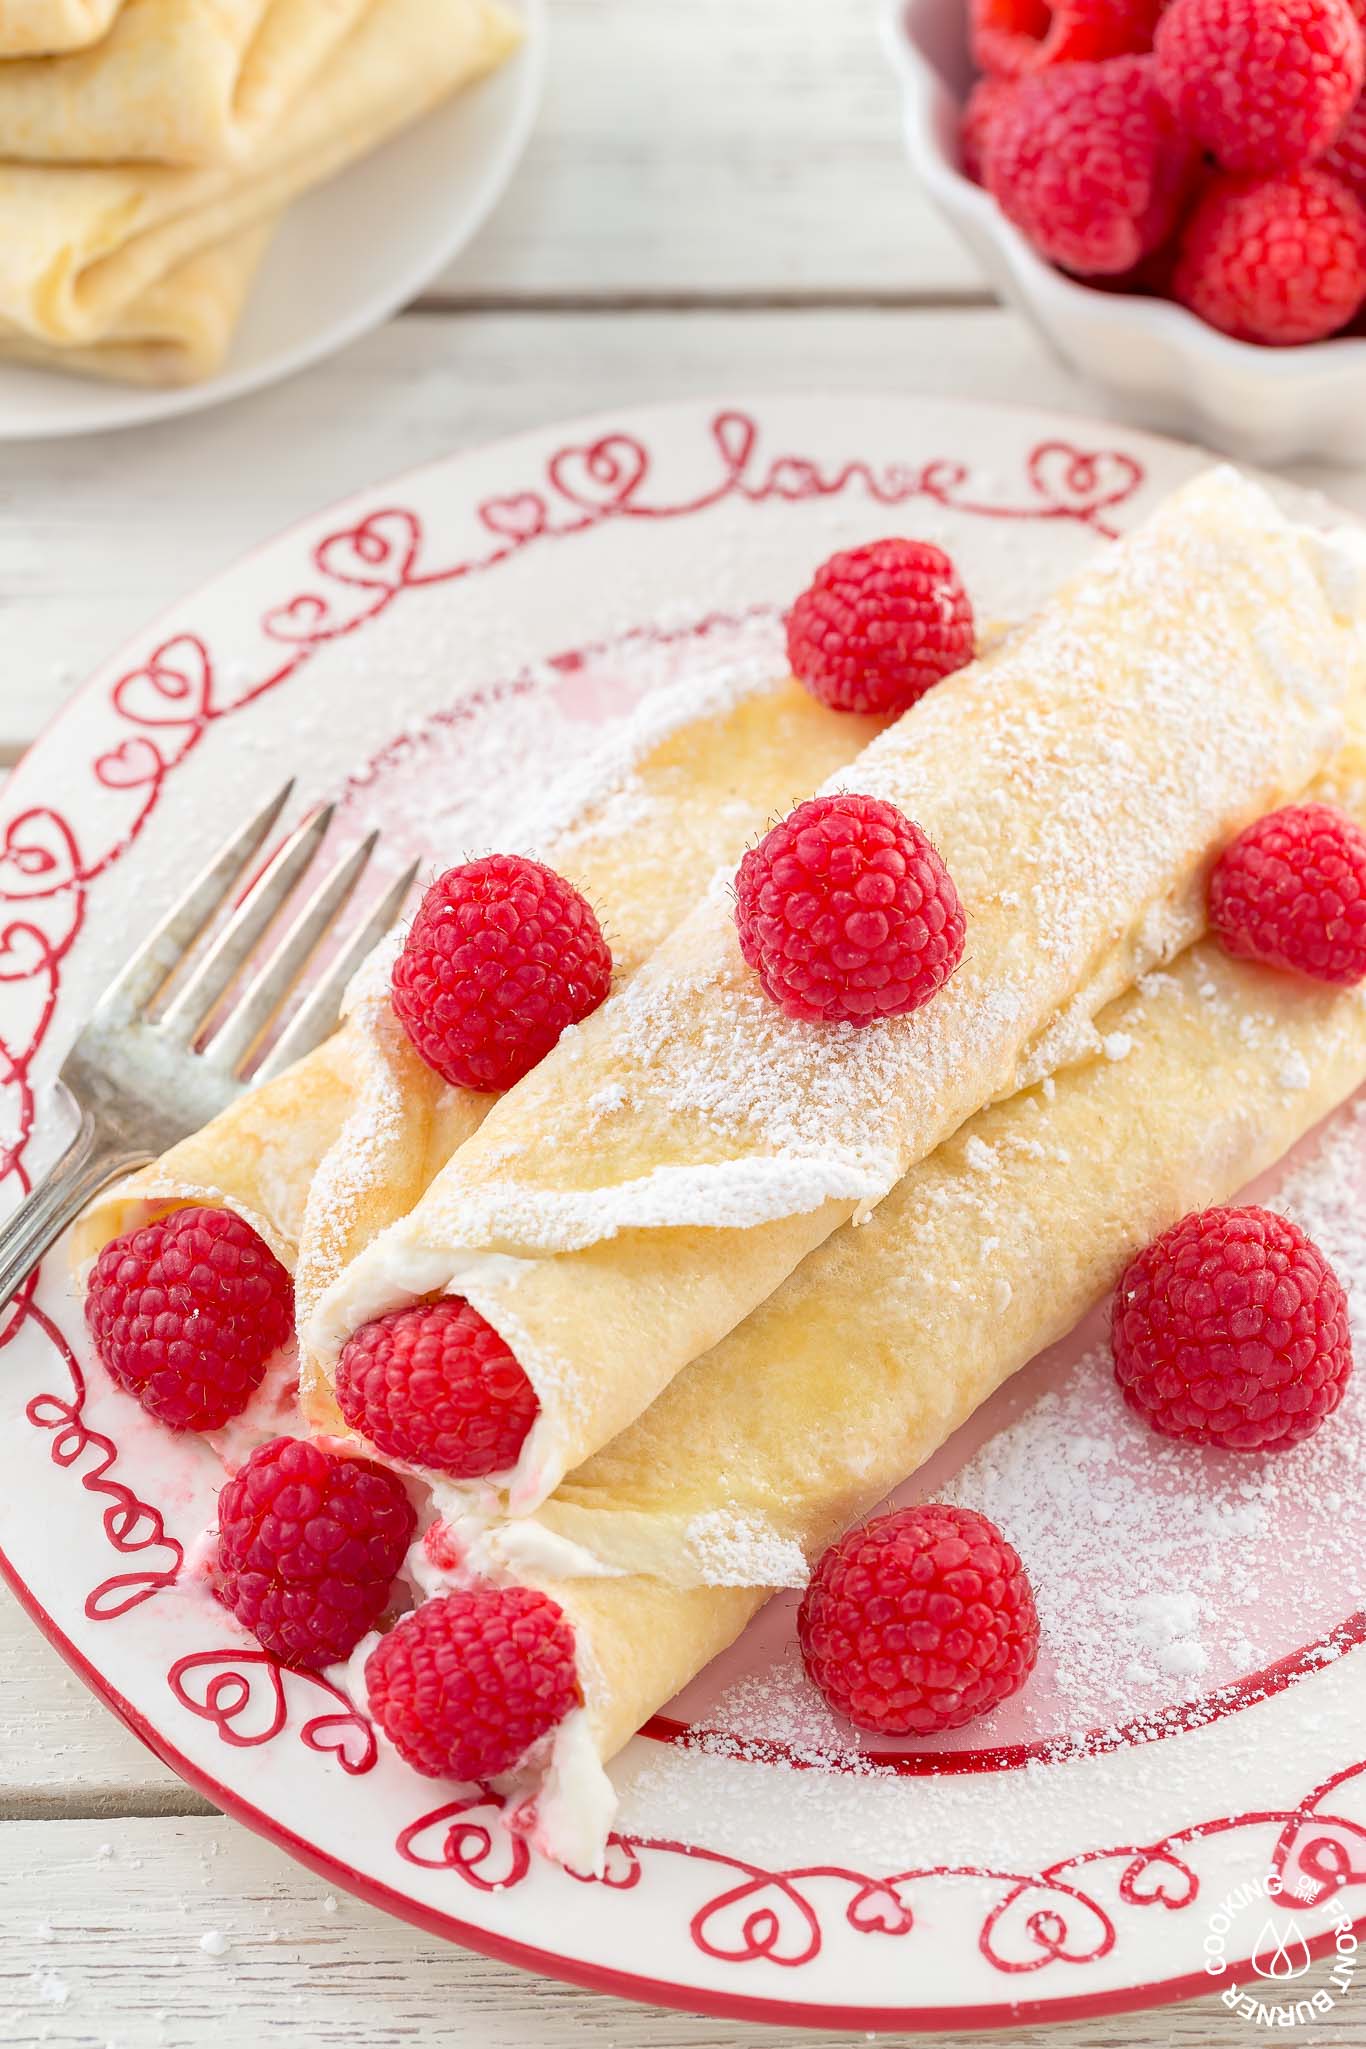 Berries and Cream Crepes